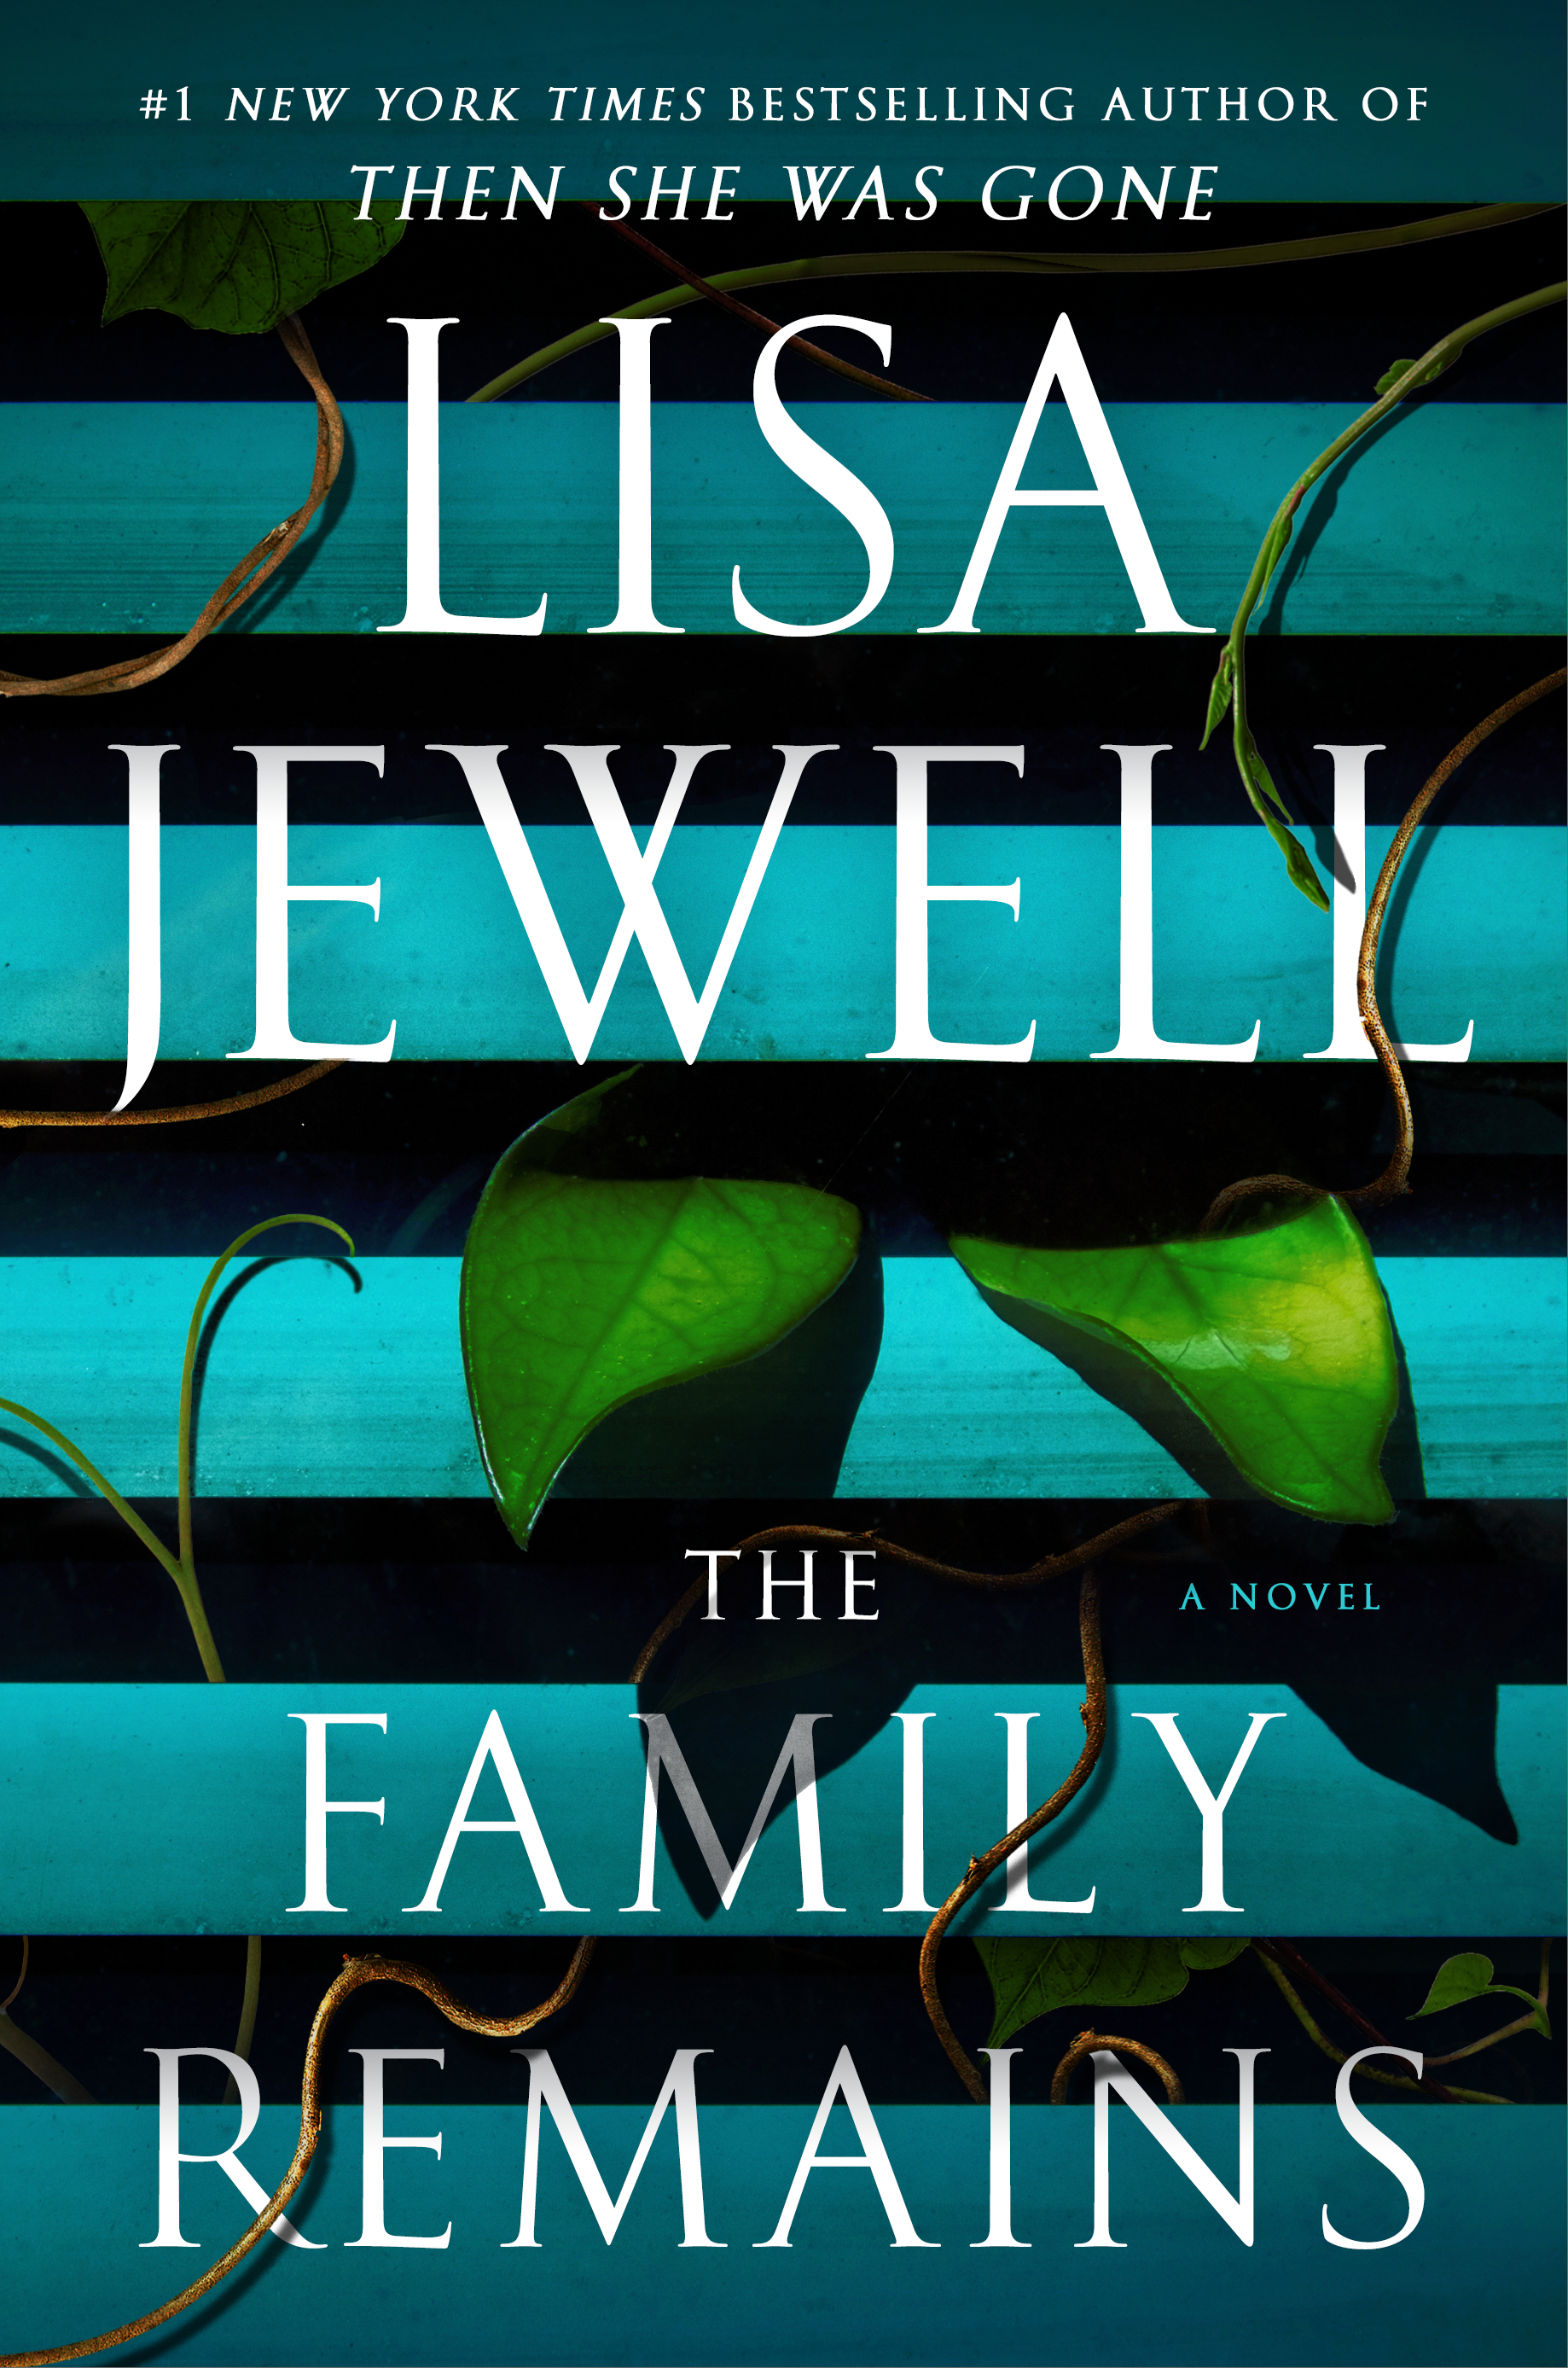 [EPUB] The Family Upstairs #2 The Family Remains by Lisa Jewell